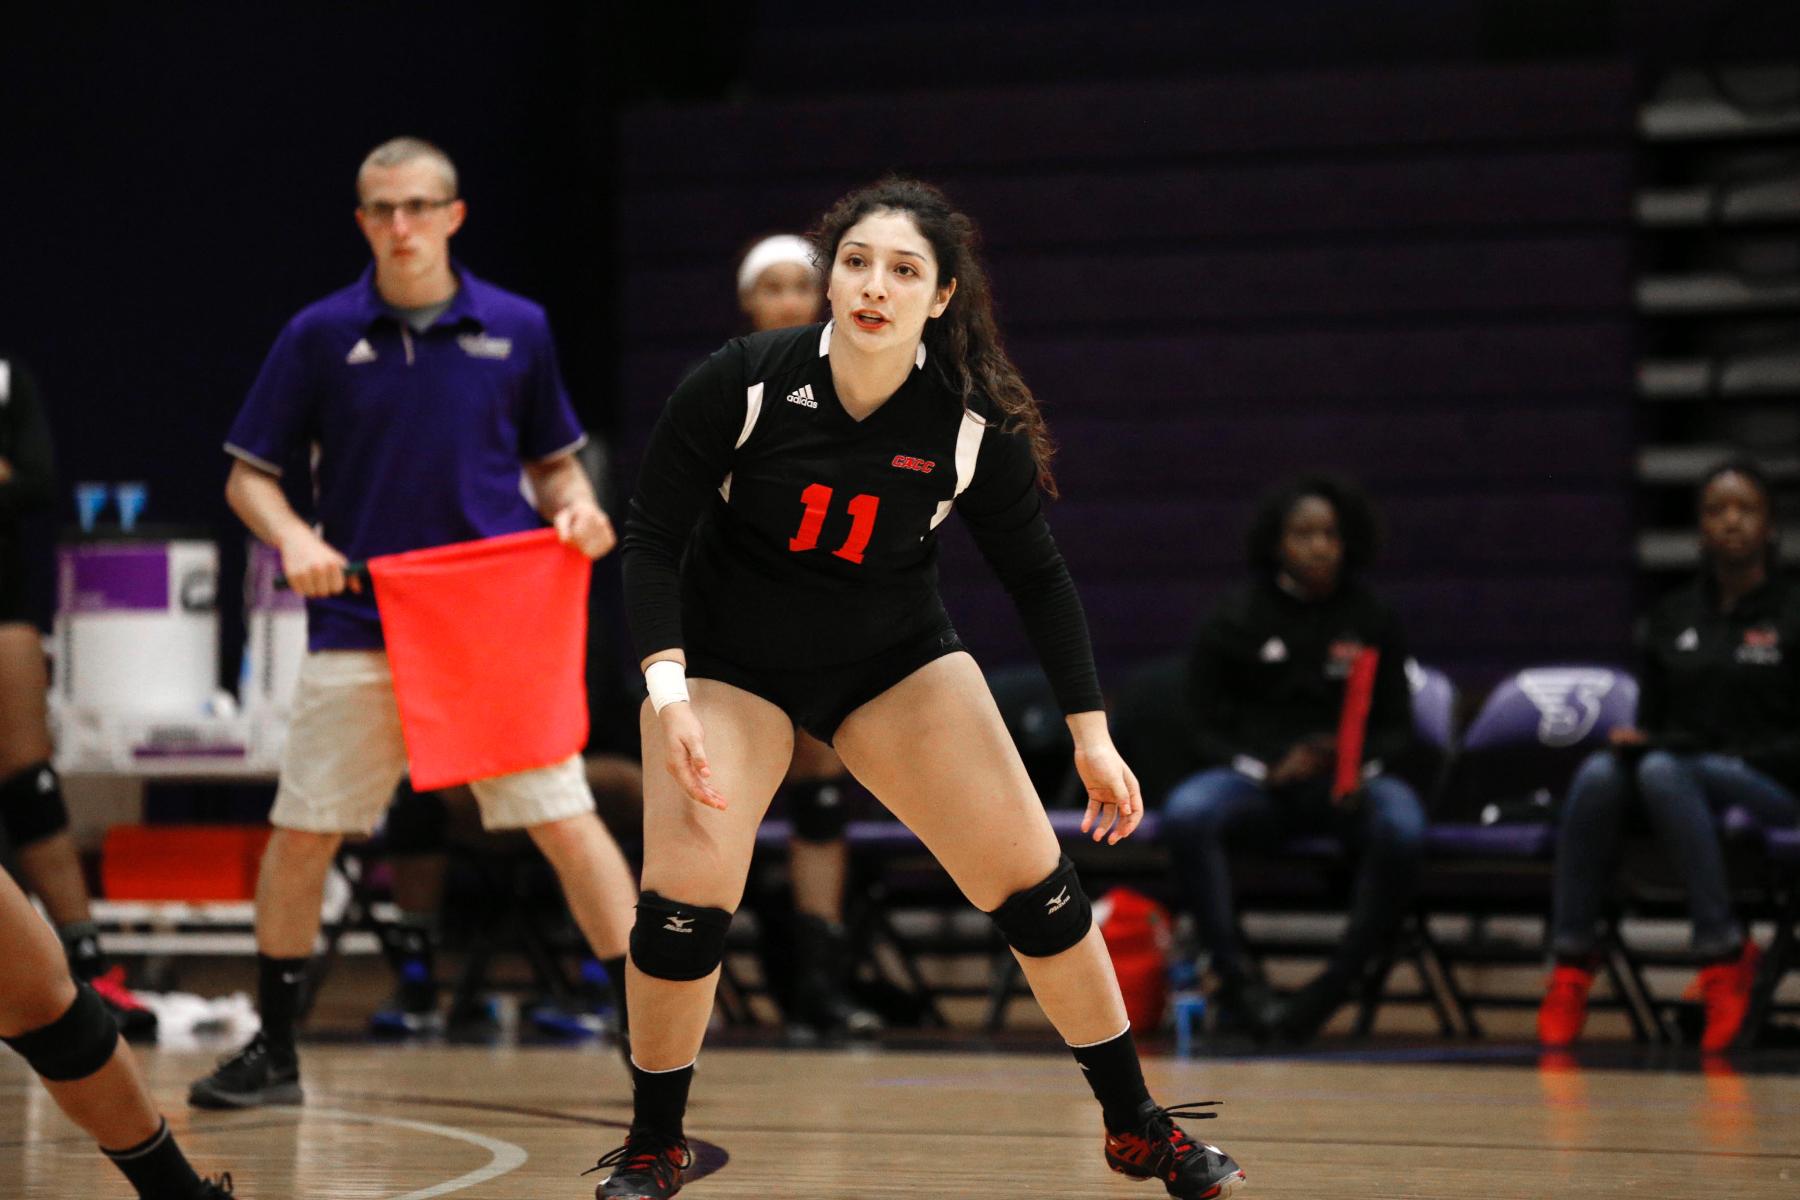 WOMEN'S VOLLEYBALL OPEN 2017 WITH LOSS TO OWLS